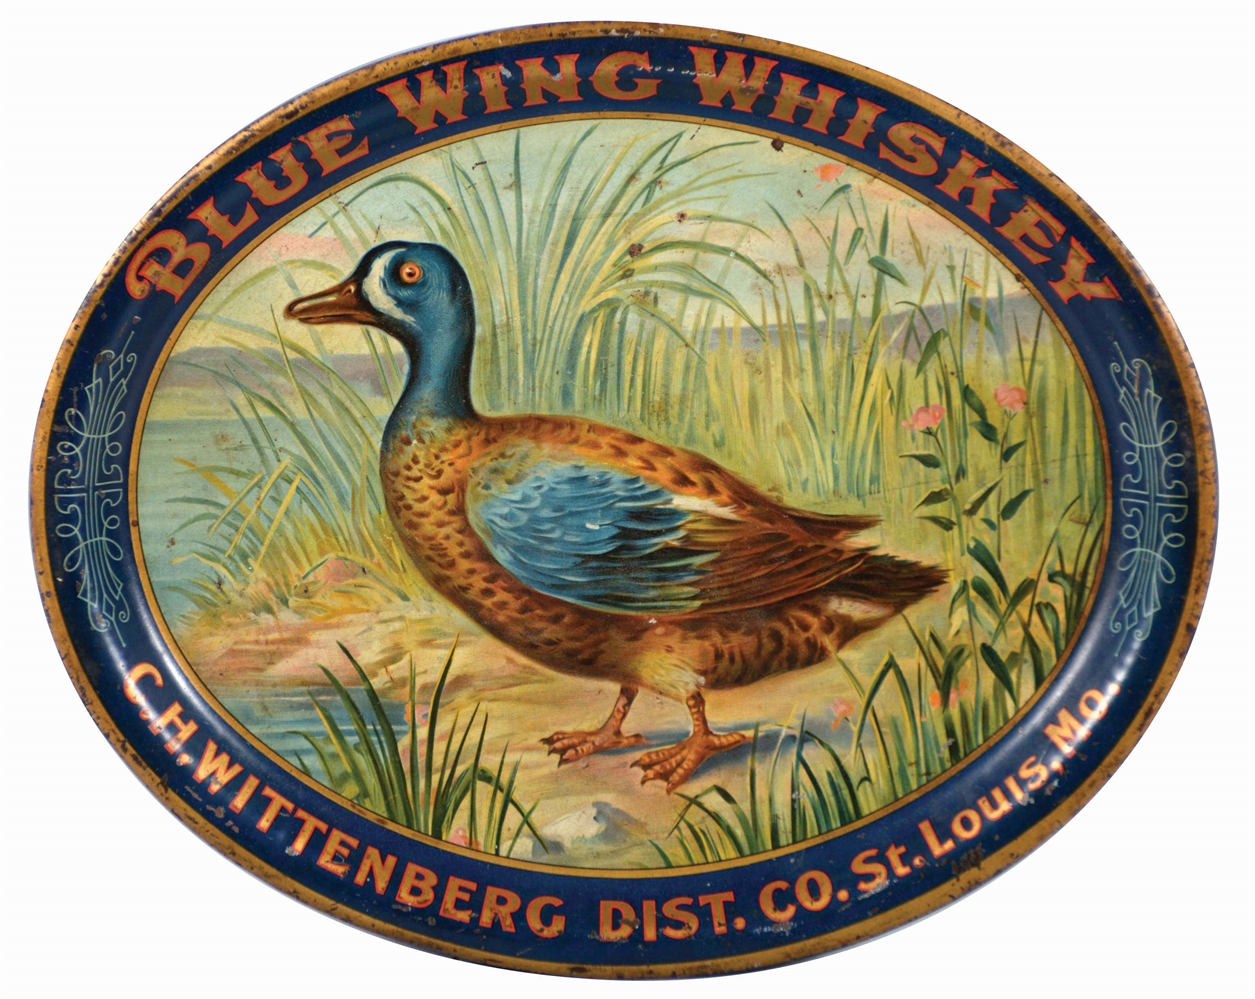 BLUE WING WHISKEY TIN LITHO ADVERTISING CHARGER. 